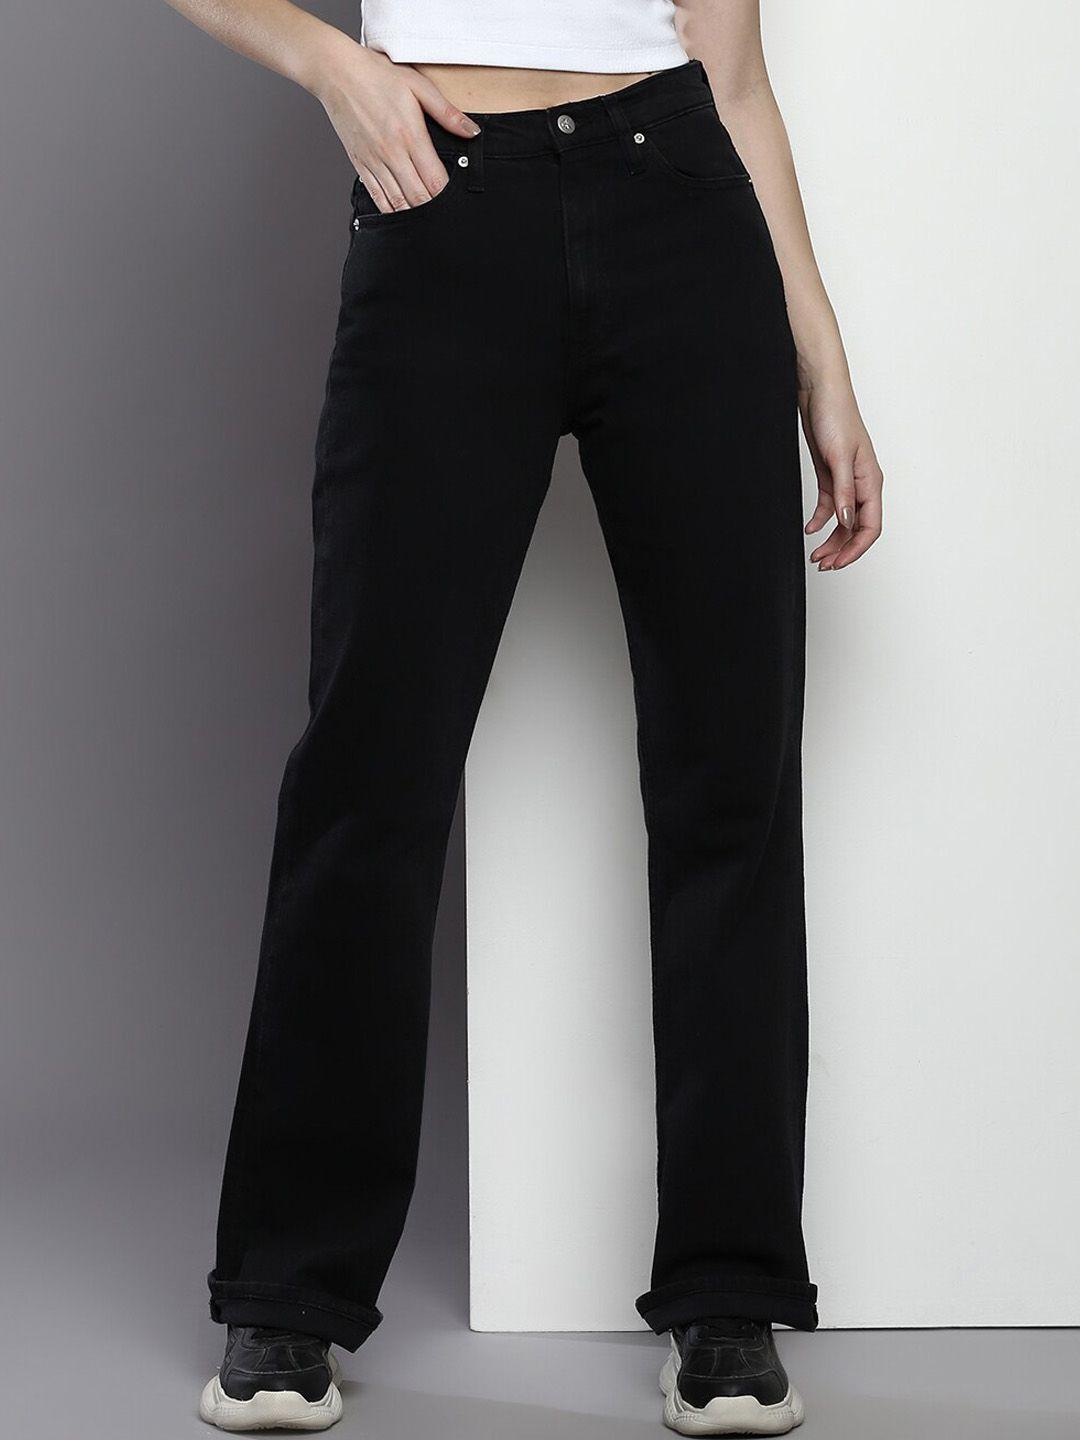 calvin klein jeans women black straight fit stretchable jeans